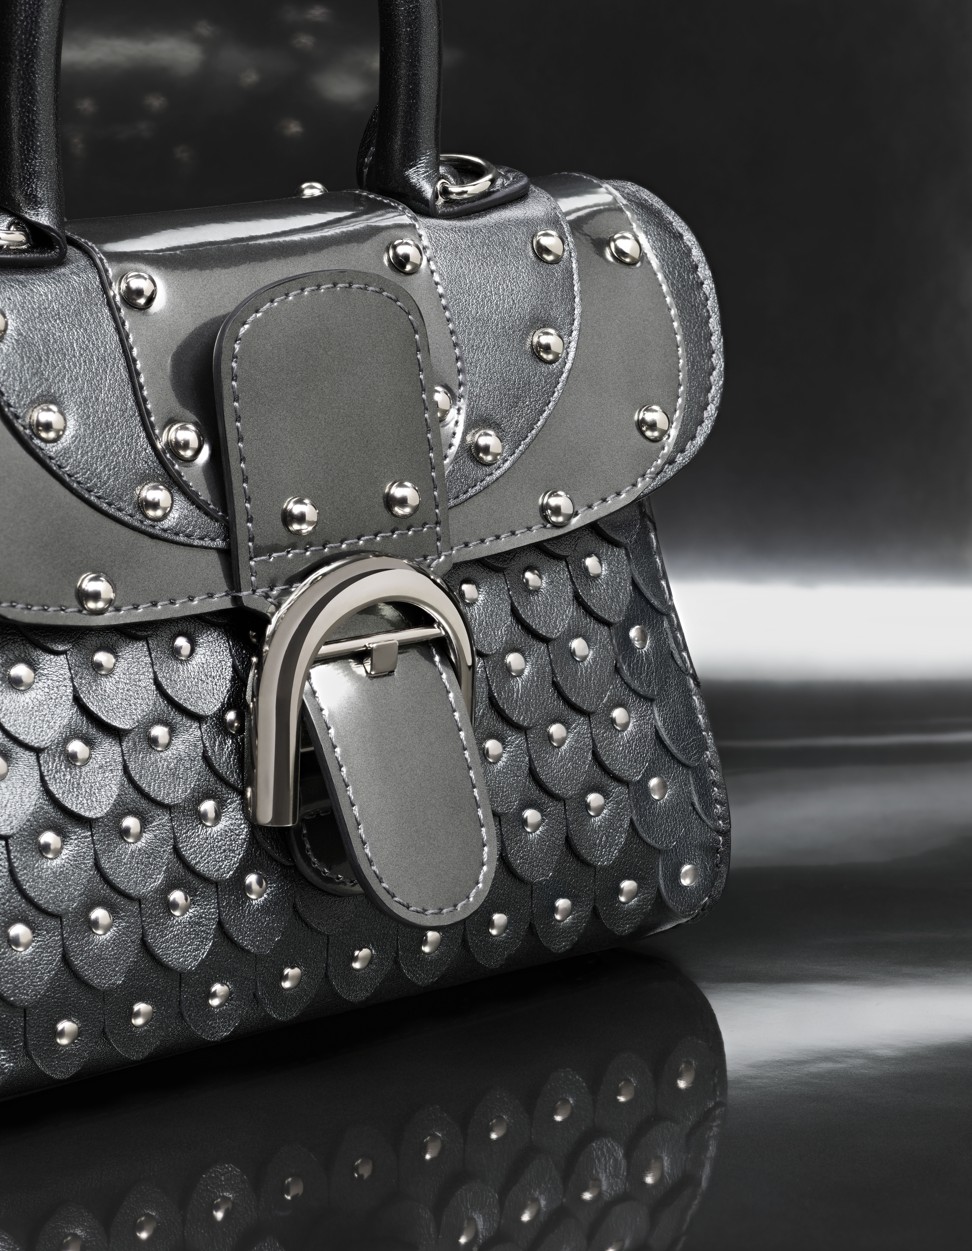 Delvaux Launches a Couture Bag Collection Inspired by Game of Thrones